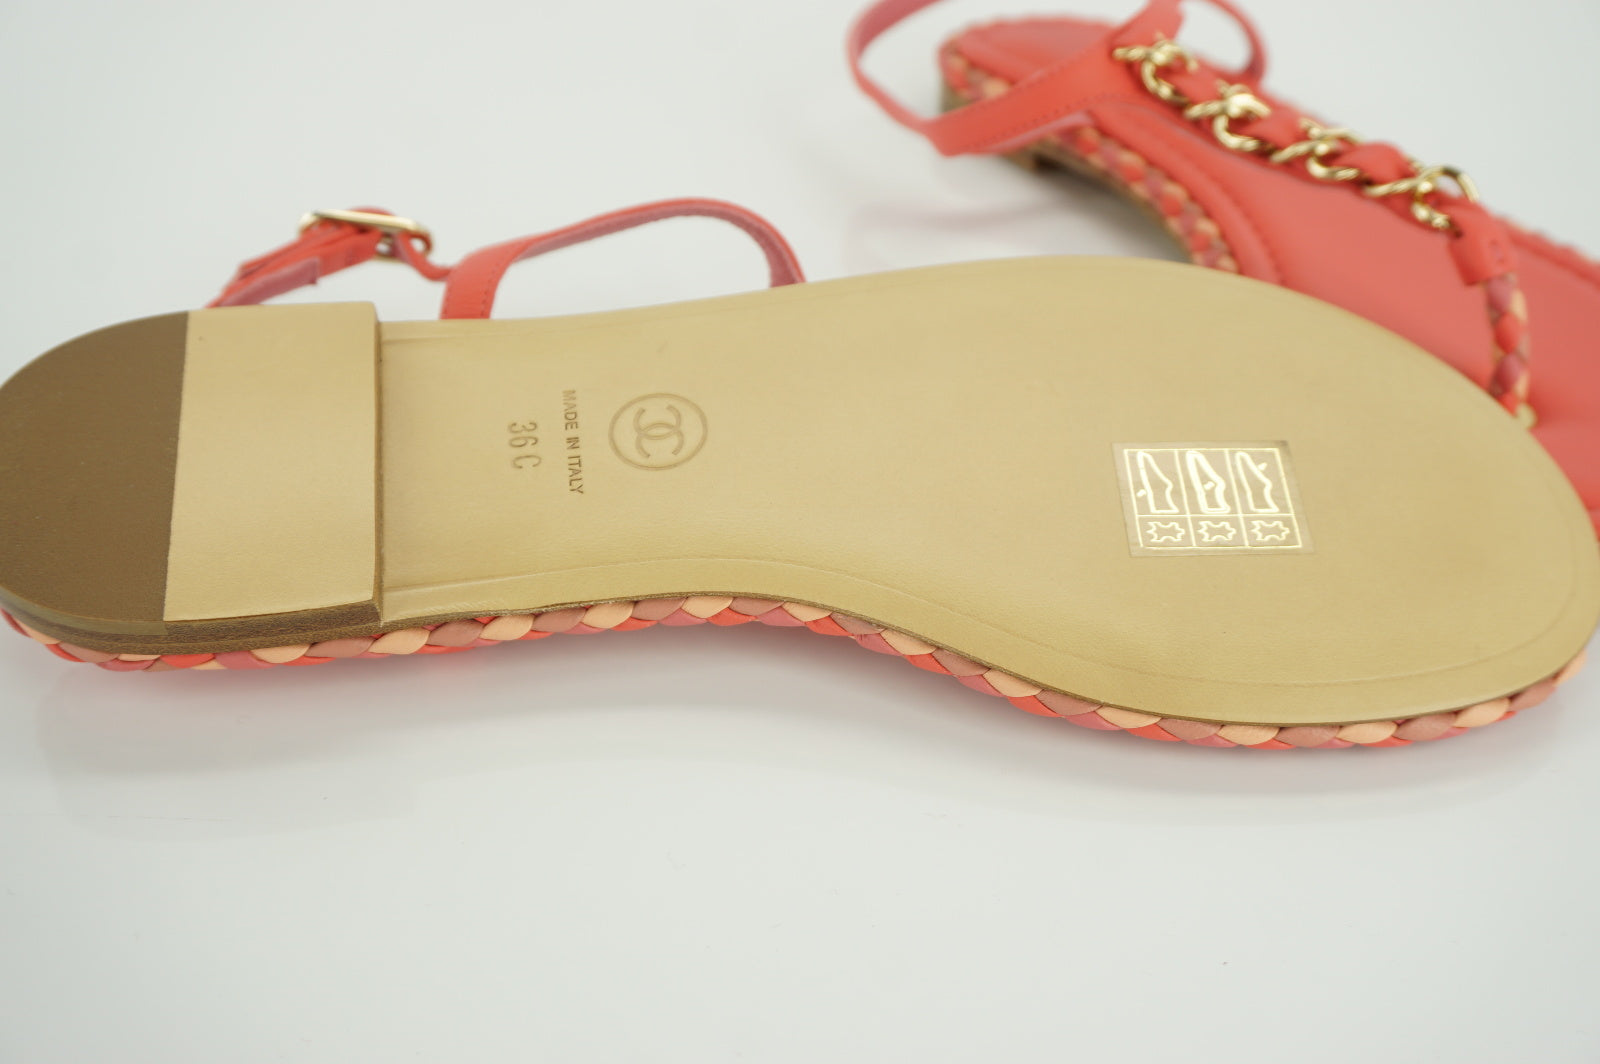 Chanel CC Logo Chain T Strap Bright Pink Thong Sandals Size 36C NIB Ankle $825